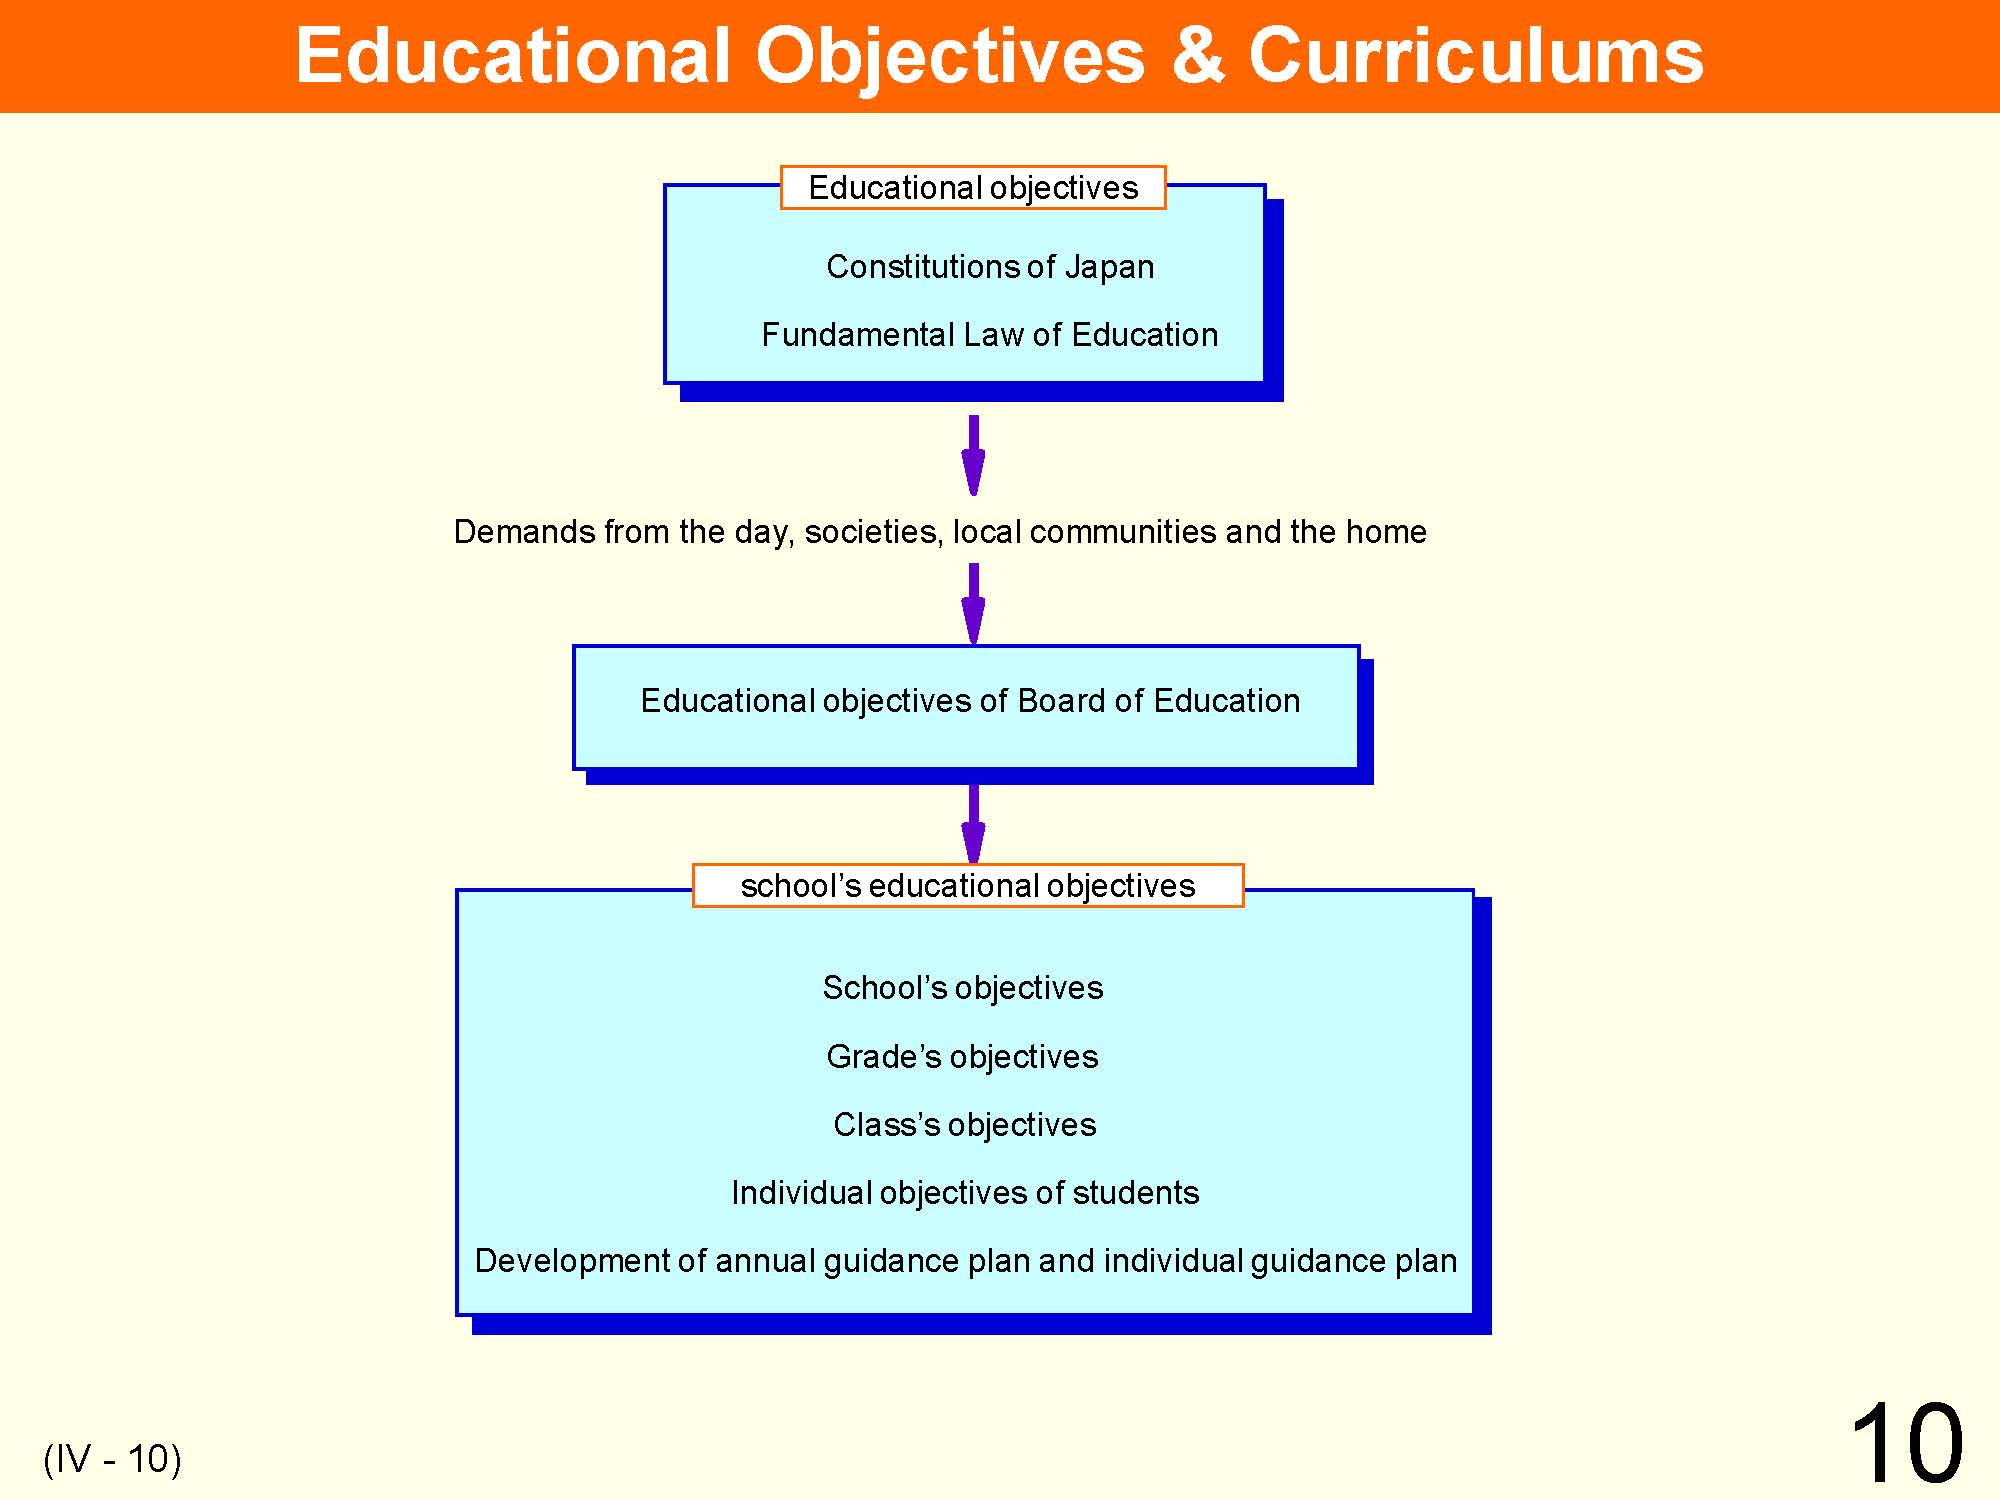 IV Organization and Implementation of Curriculum